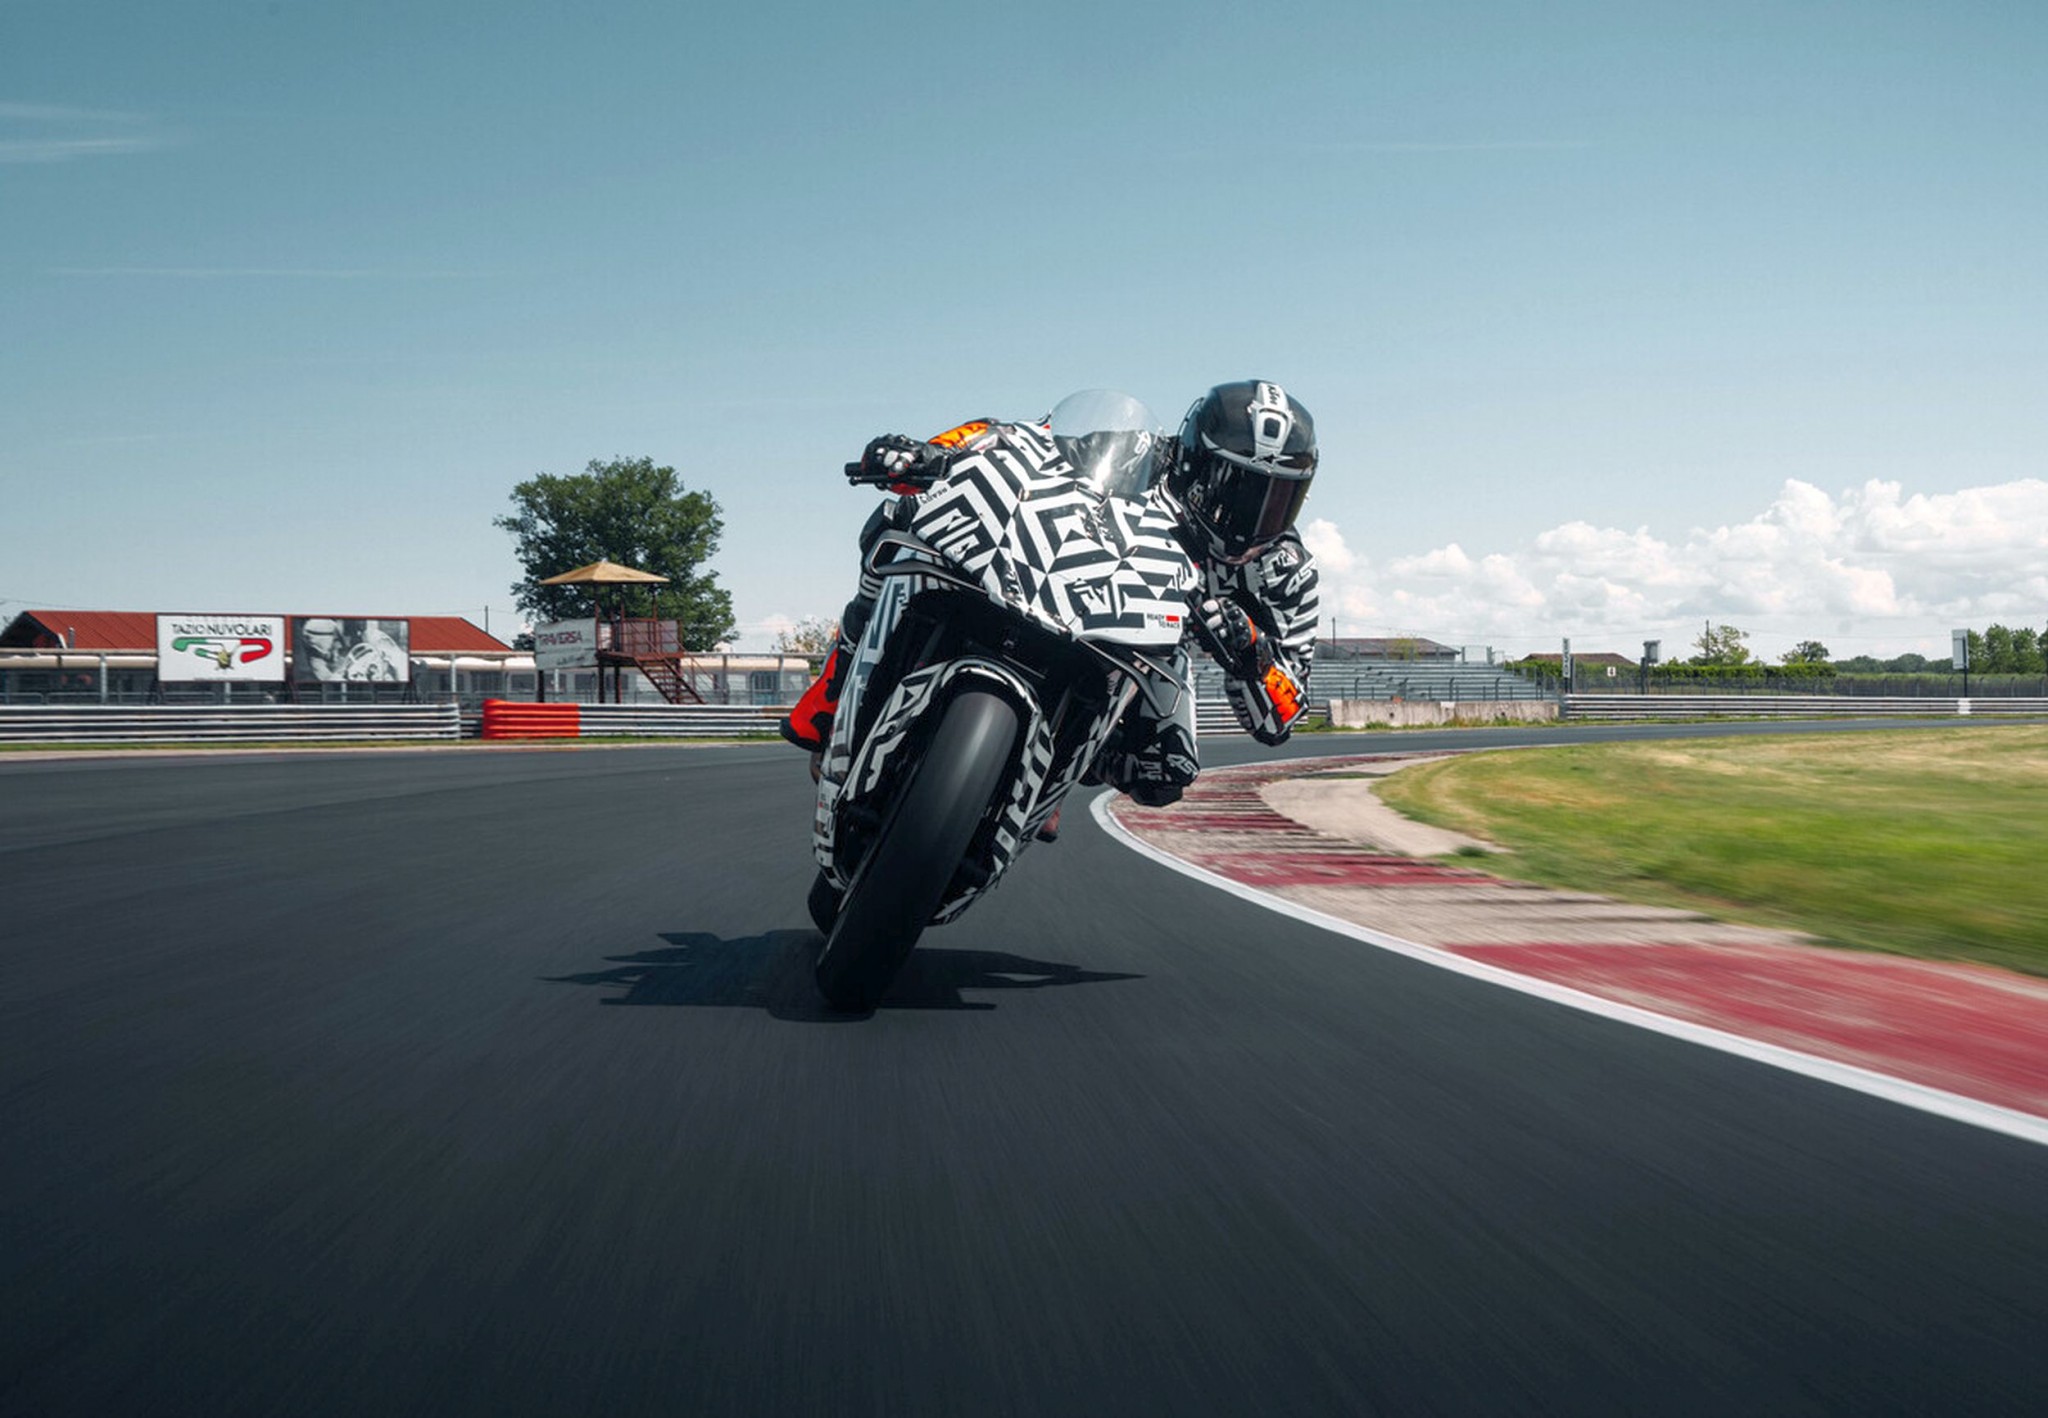 KTM 990 RC R - finally the thoroughbred sports bike for the road! - Image 10